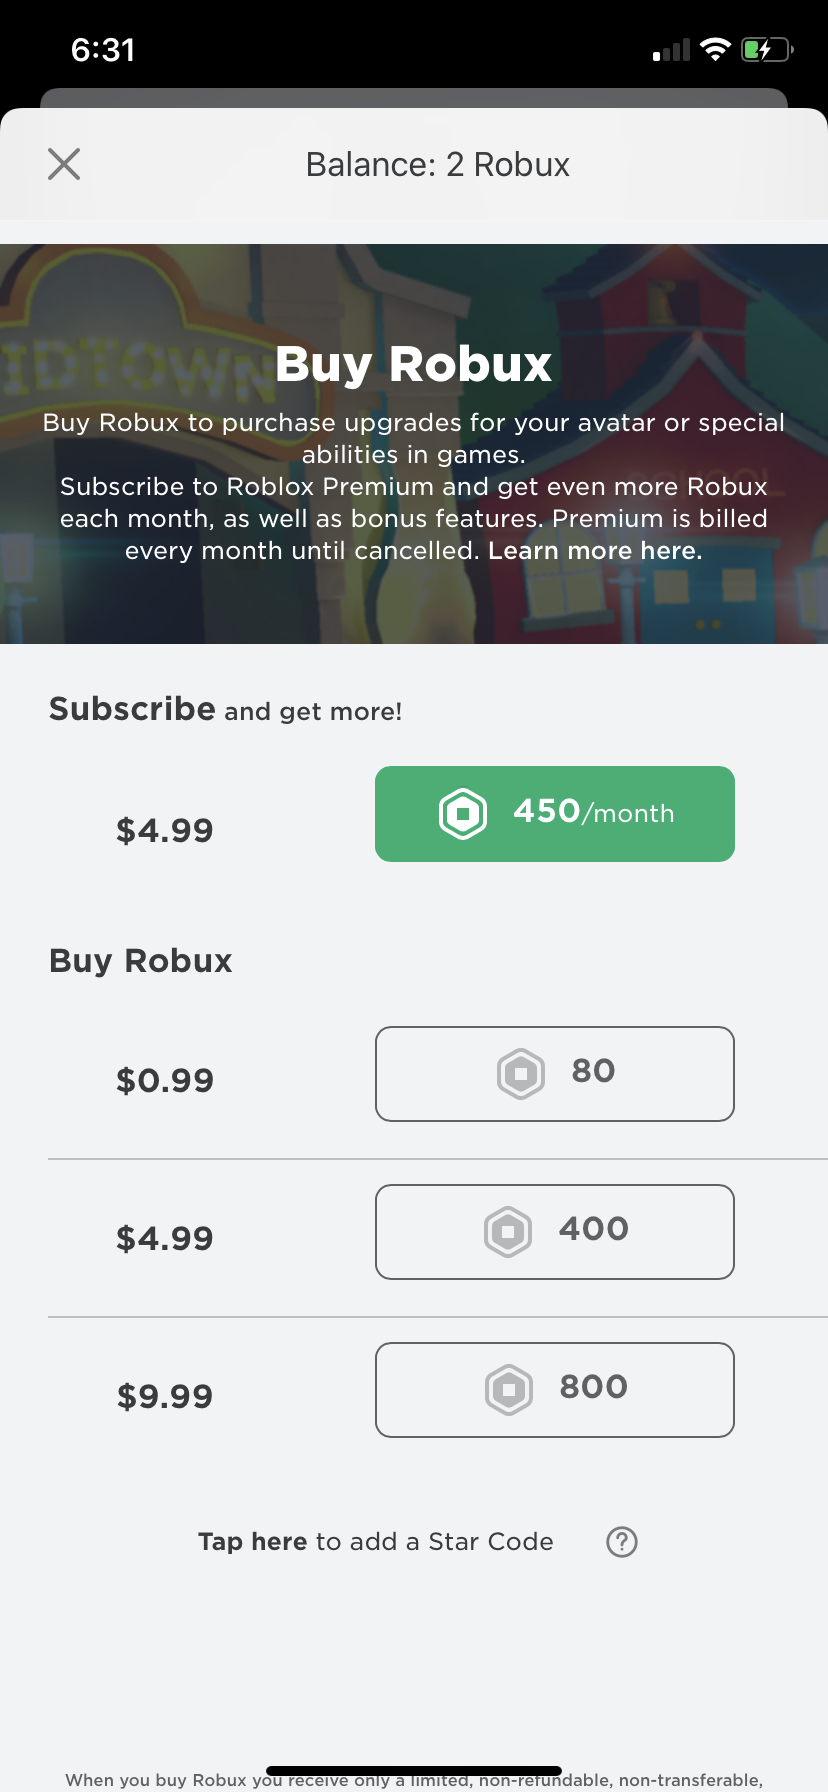 Wait Can Y All Help Me I M Trying To Get Like The 20 Robux Amount But I Don T Have That Option Fandom - purchase 80 robux on roblox